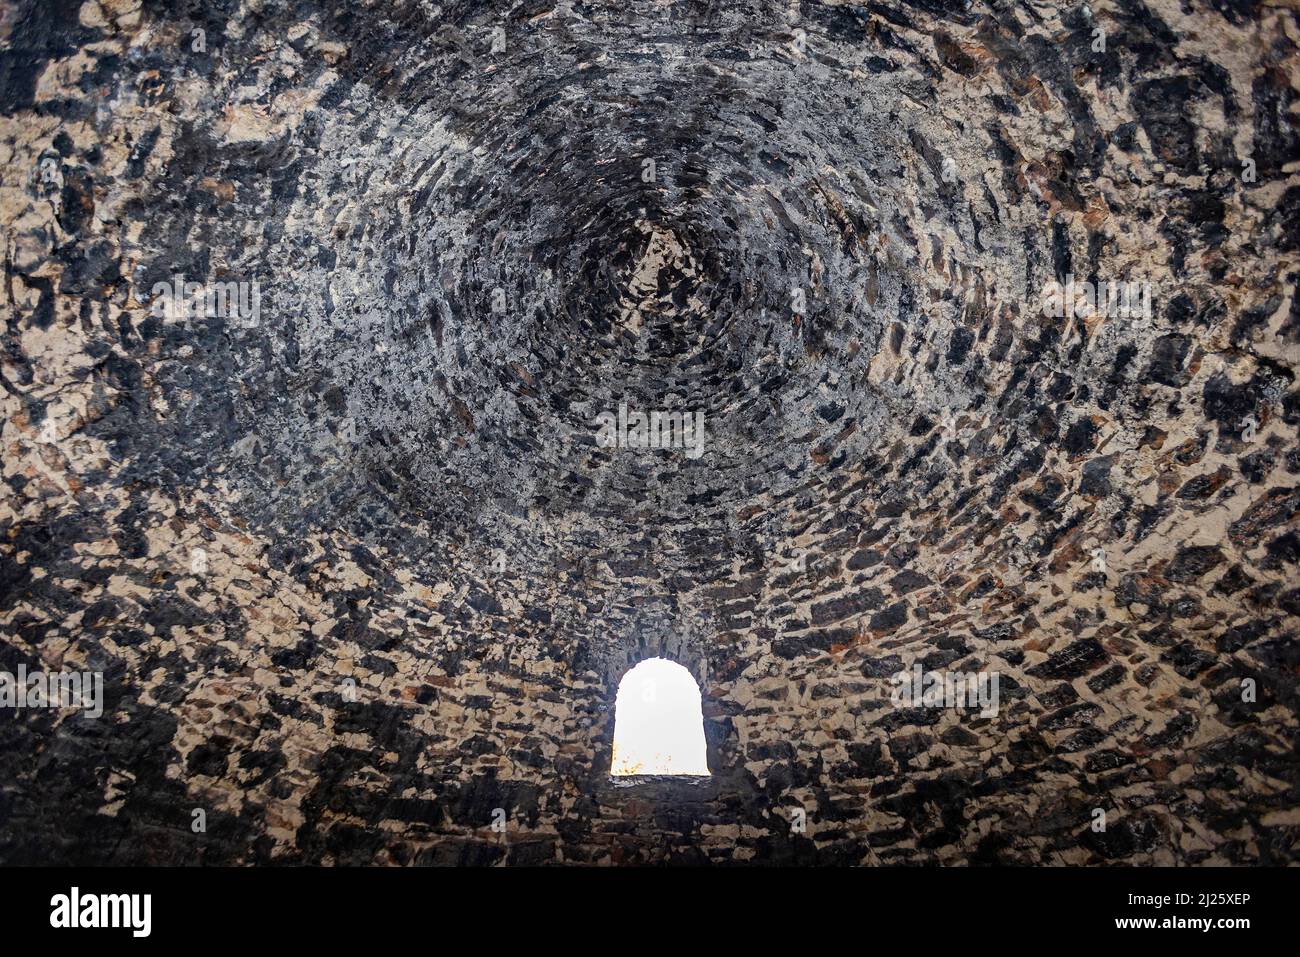 This is a straight-up view of the interior of one of the ten Wildrose Charcoal Kilns in Wildrose Canyon of Death Valley National Park, California, USA. Stock Photo